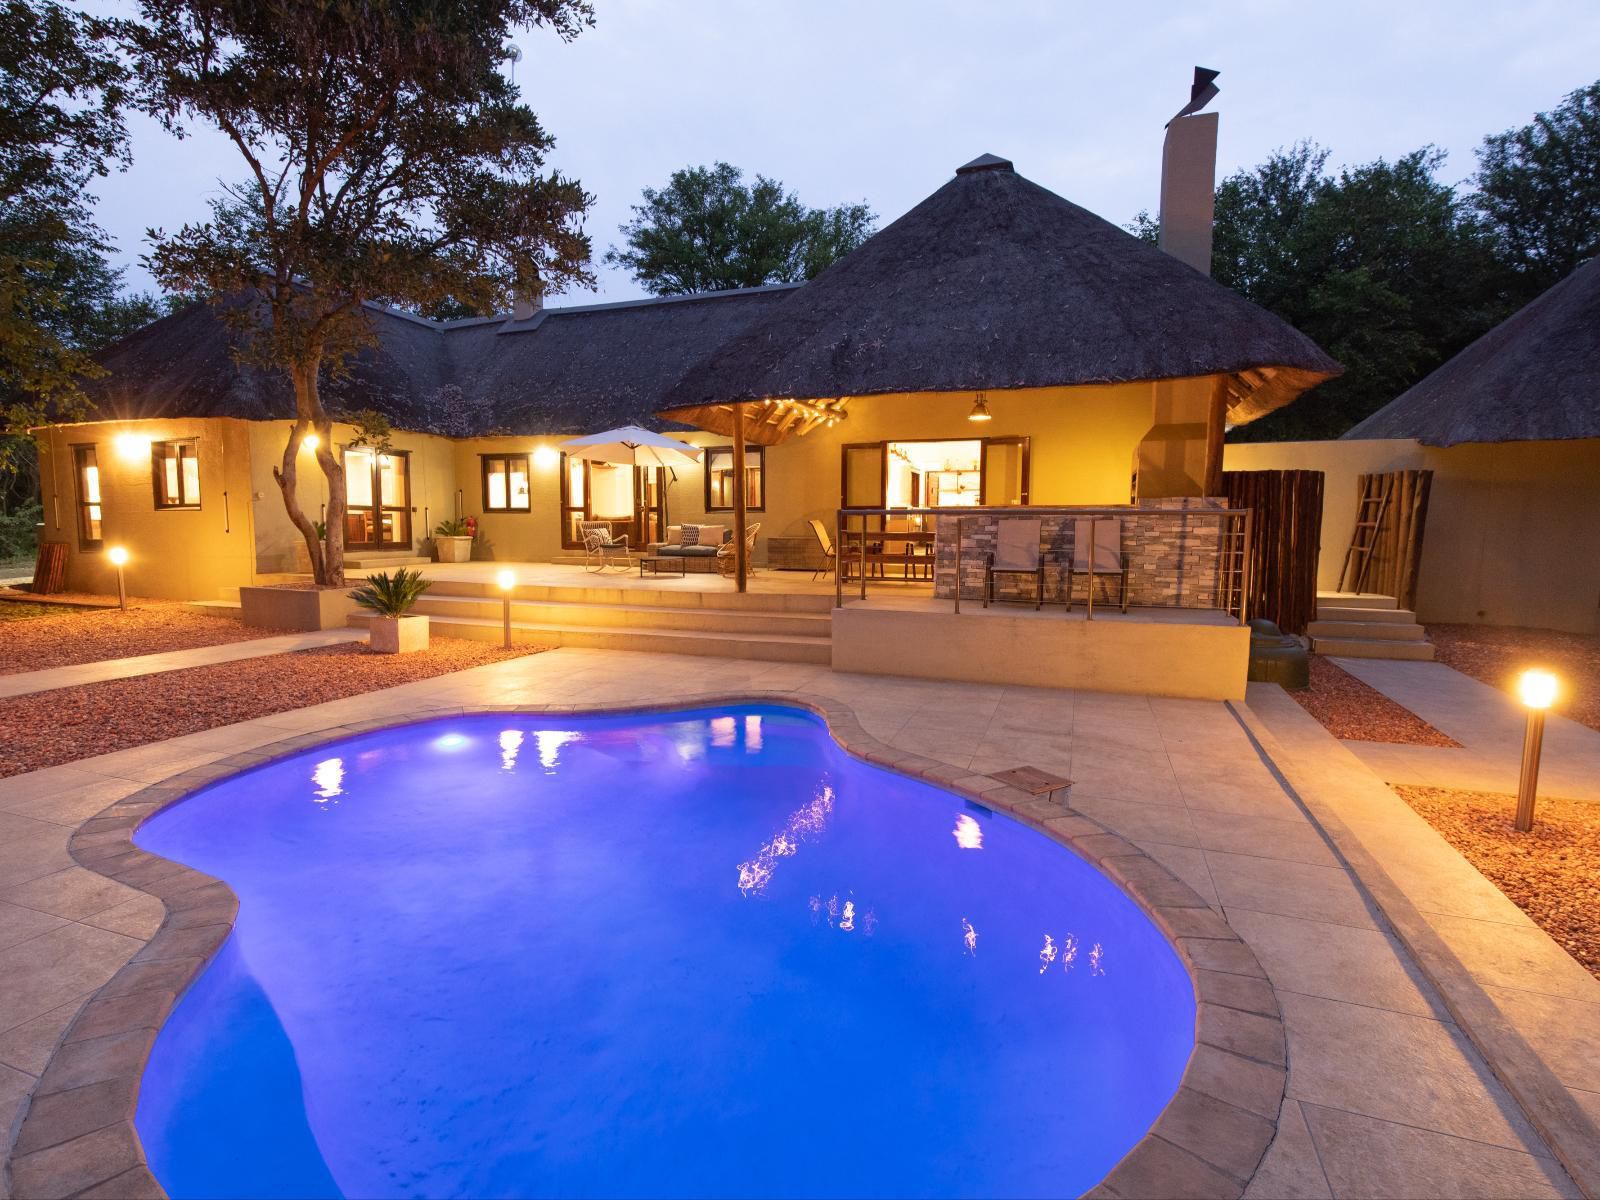 Kingly Bush Villa Phalaborwa Limpopo Province South Africa Complementary Colors, House, Building, Architecture, Swimming Pool